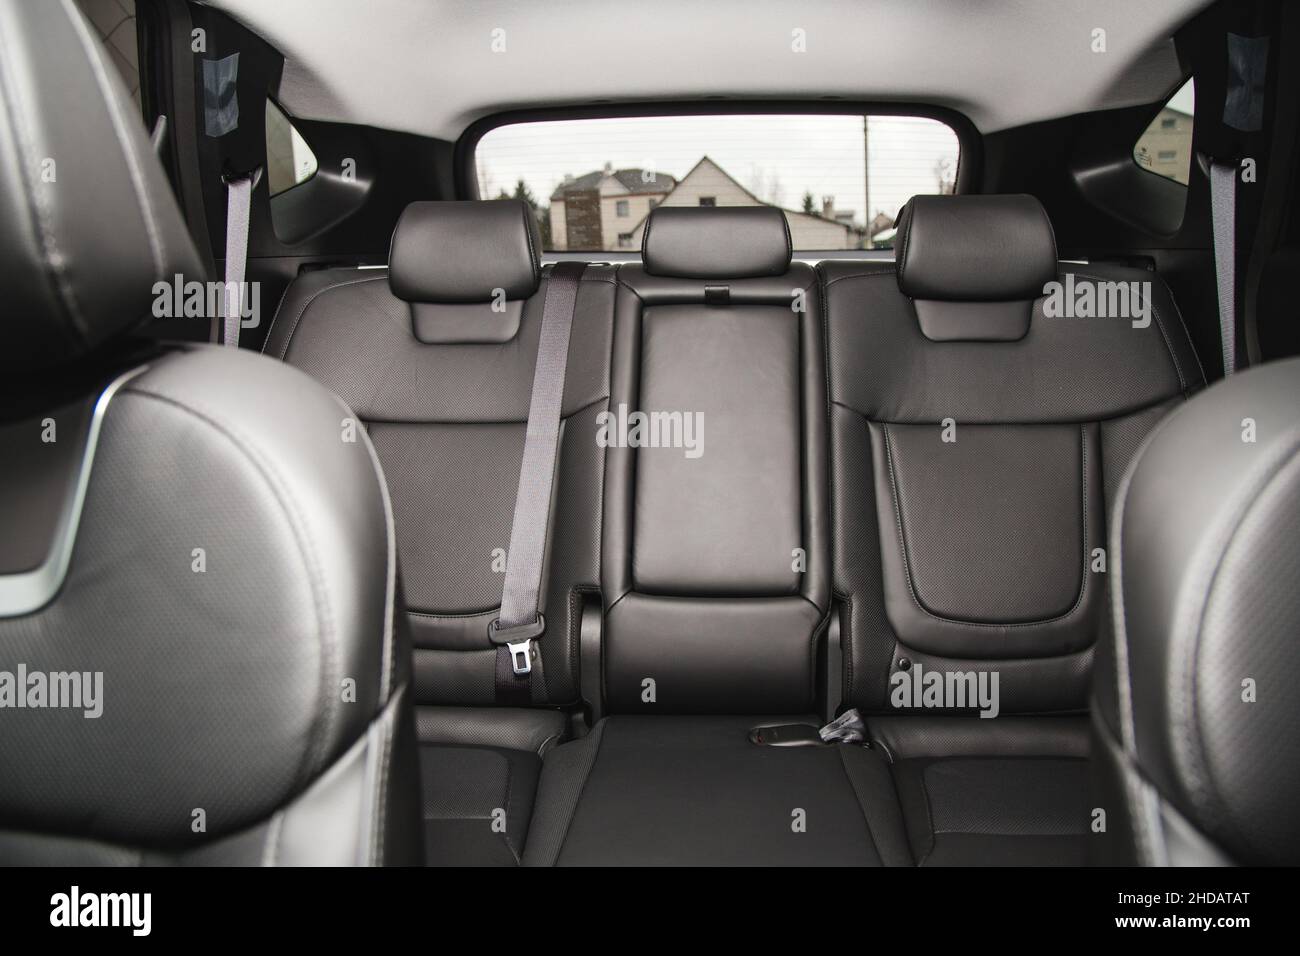 Back passenger seats in modern luxury car, frontal view Stock Photo